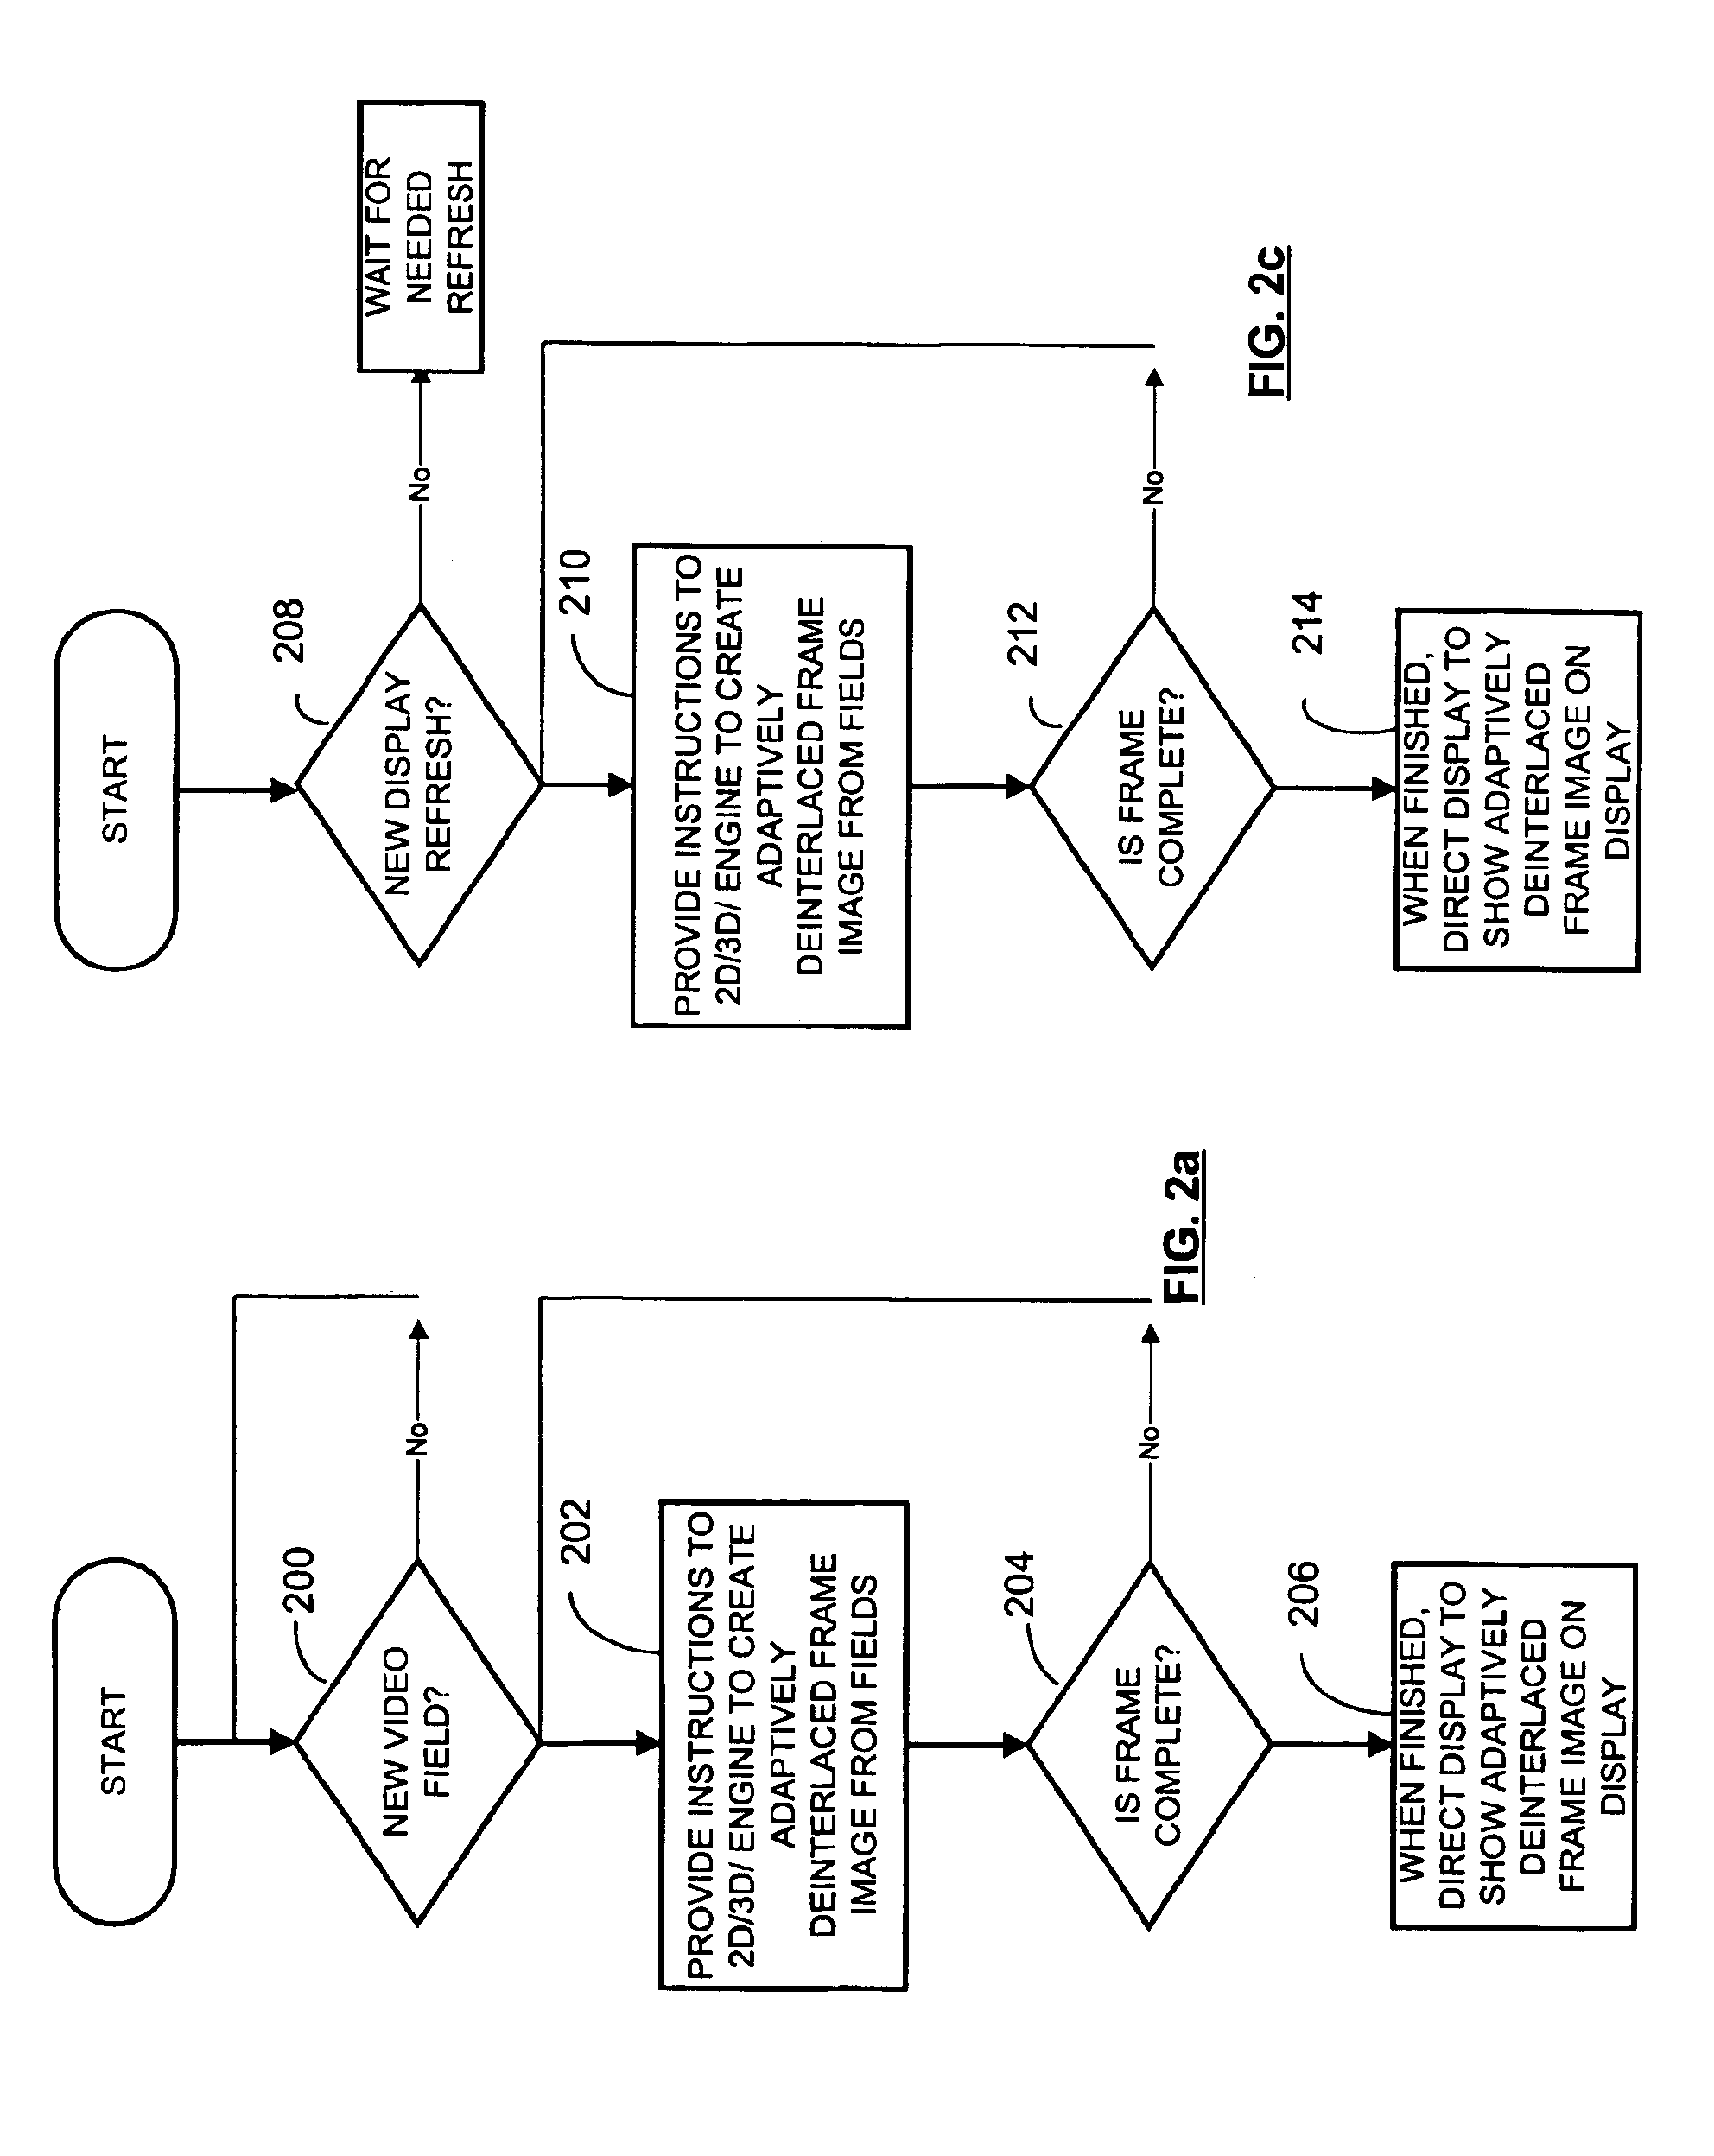 Method for deinterlacing interlaced video by a graphics processor